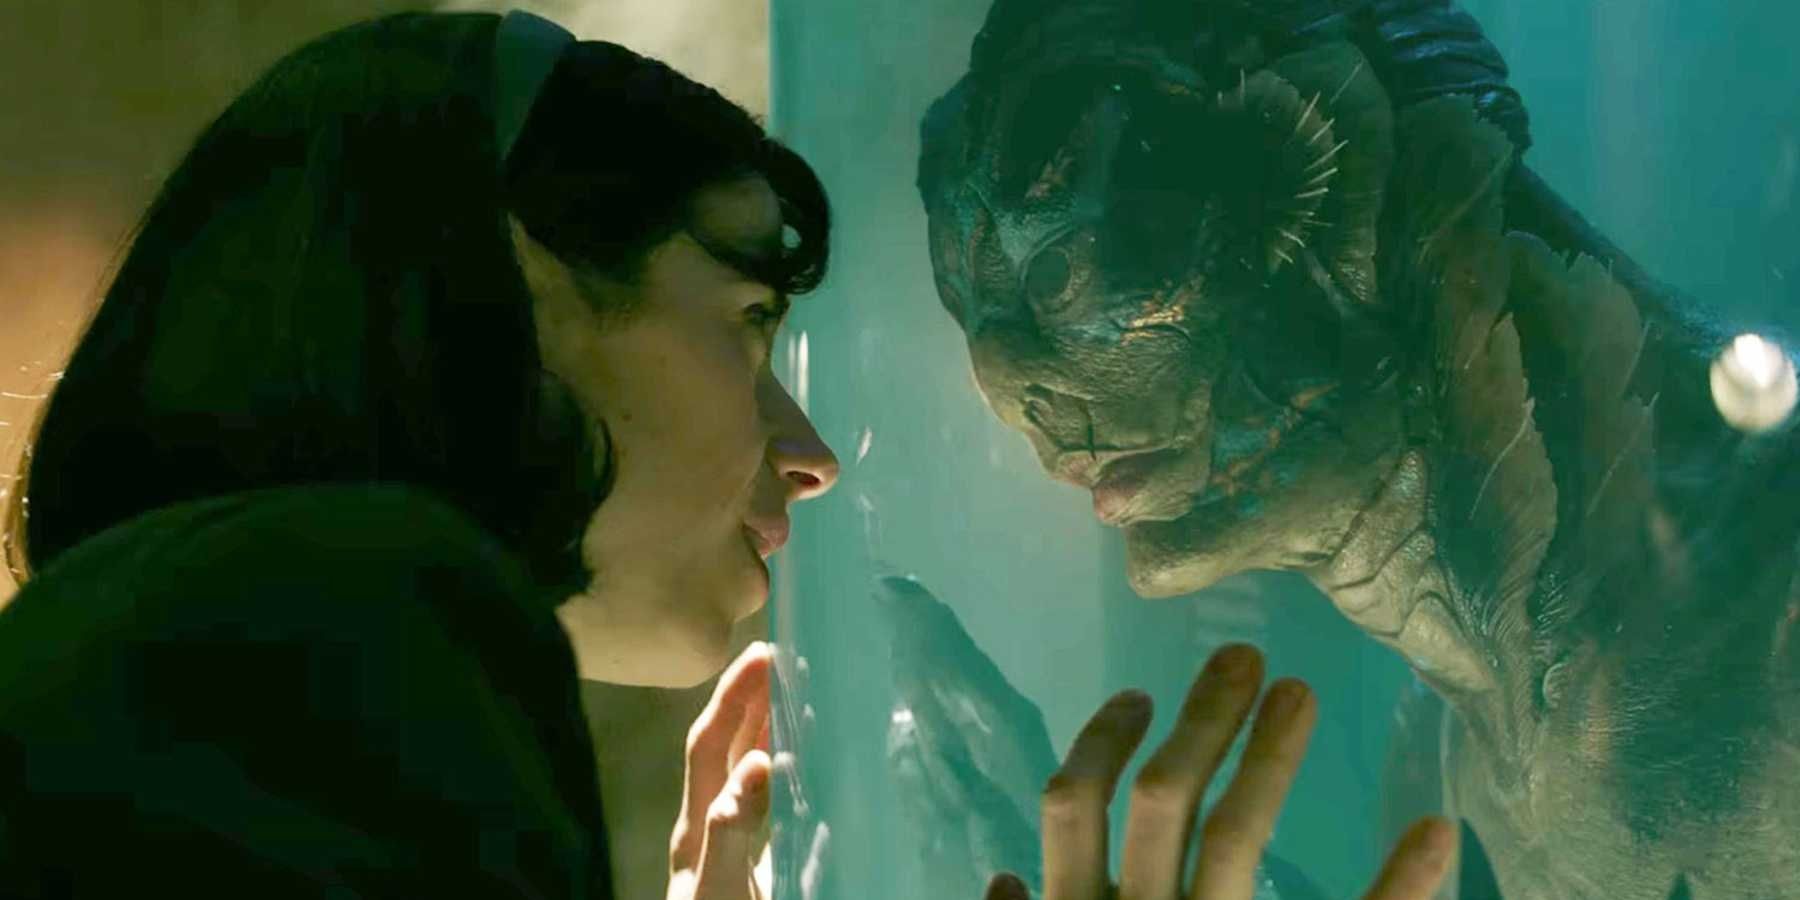 Guillermo Del Toro 5 Reasons Why Pans Labyrinth Is His Best Fantasy Movie (& 5 Why Shape Of Water Is A Close Second)